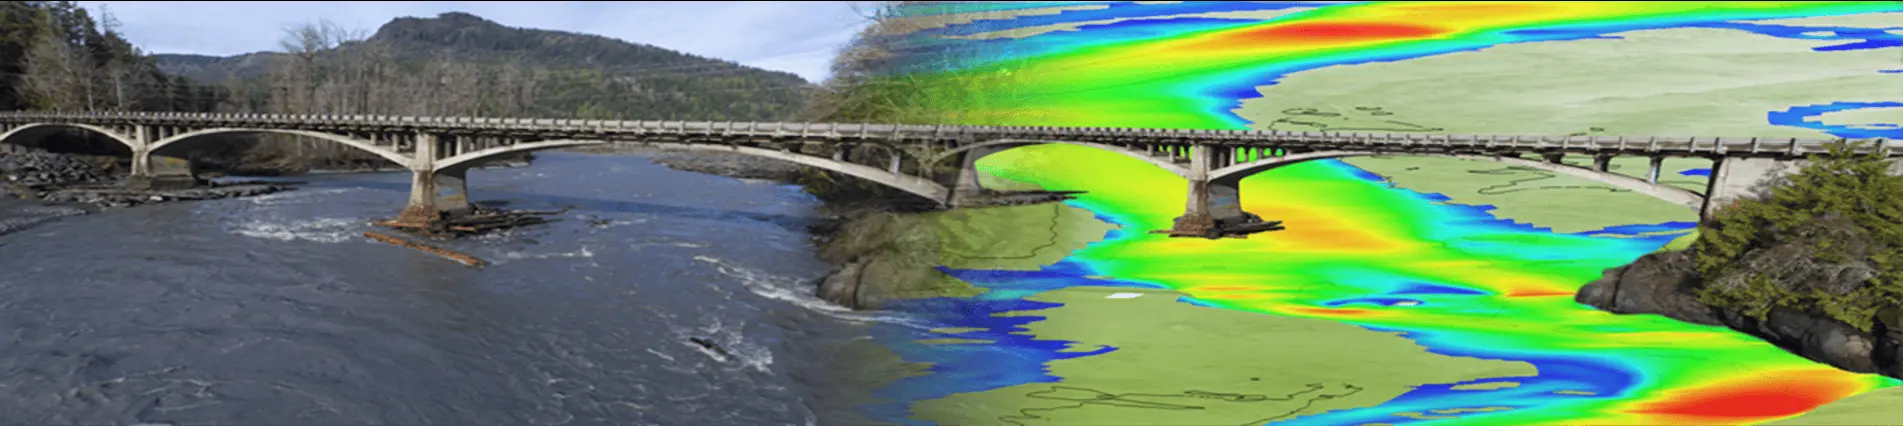 A bridge shown in two views - a one-dimensional view on the left and a two-dimensional view of stream flow by color gradient on the right.